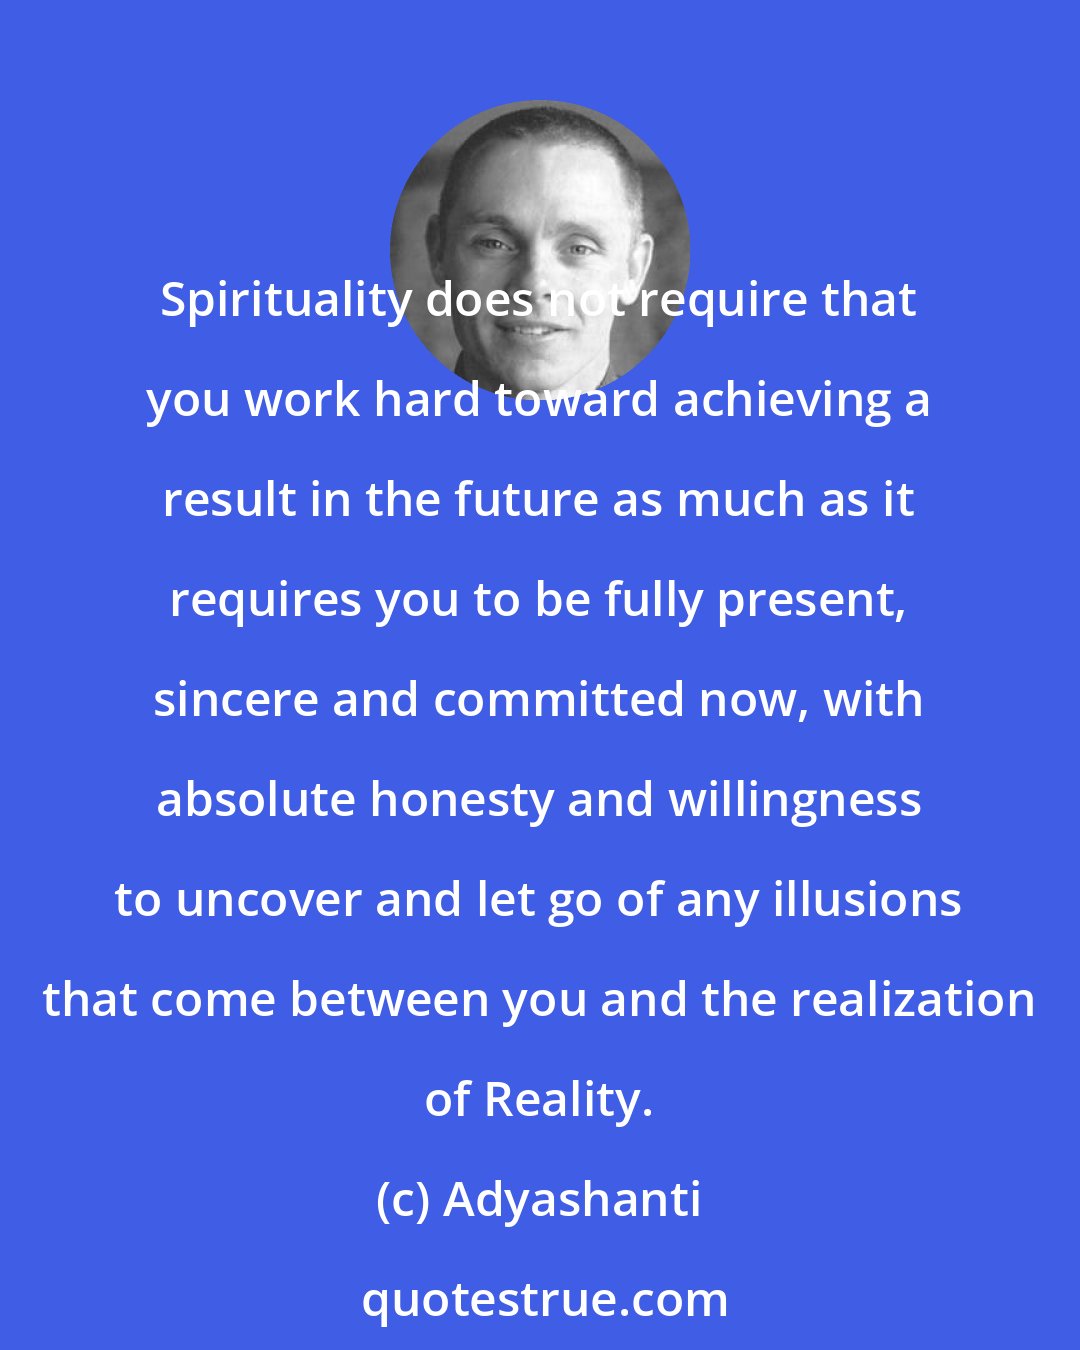 Adyashanti: Spirituality does not require that you work hard toward achieving a result in the future as much as it requires you to be fully present, sincere and committed now, with absolute honesty and willingness to uncover and let go of any illusions that come between you and the realization of Reality.